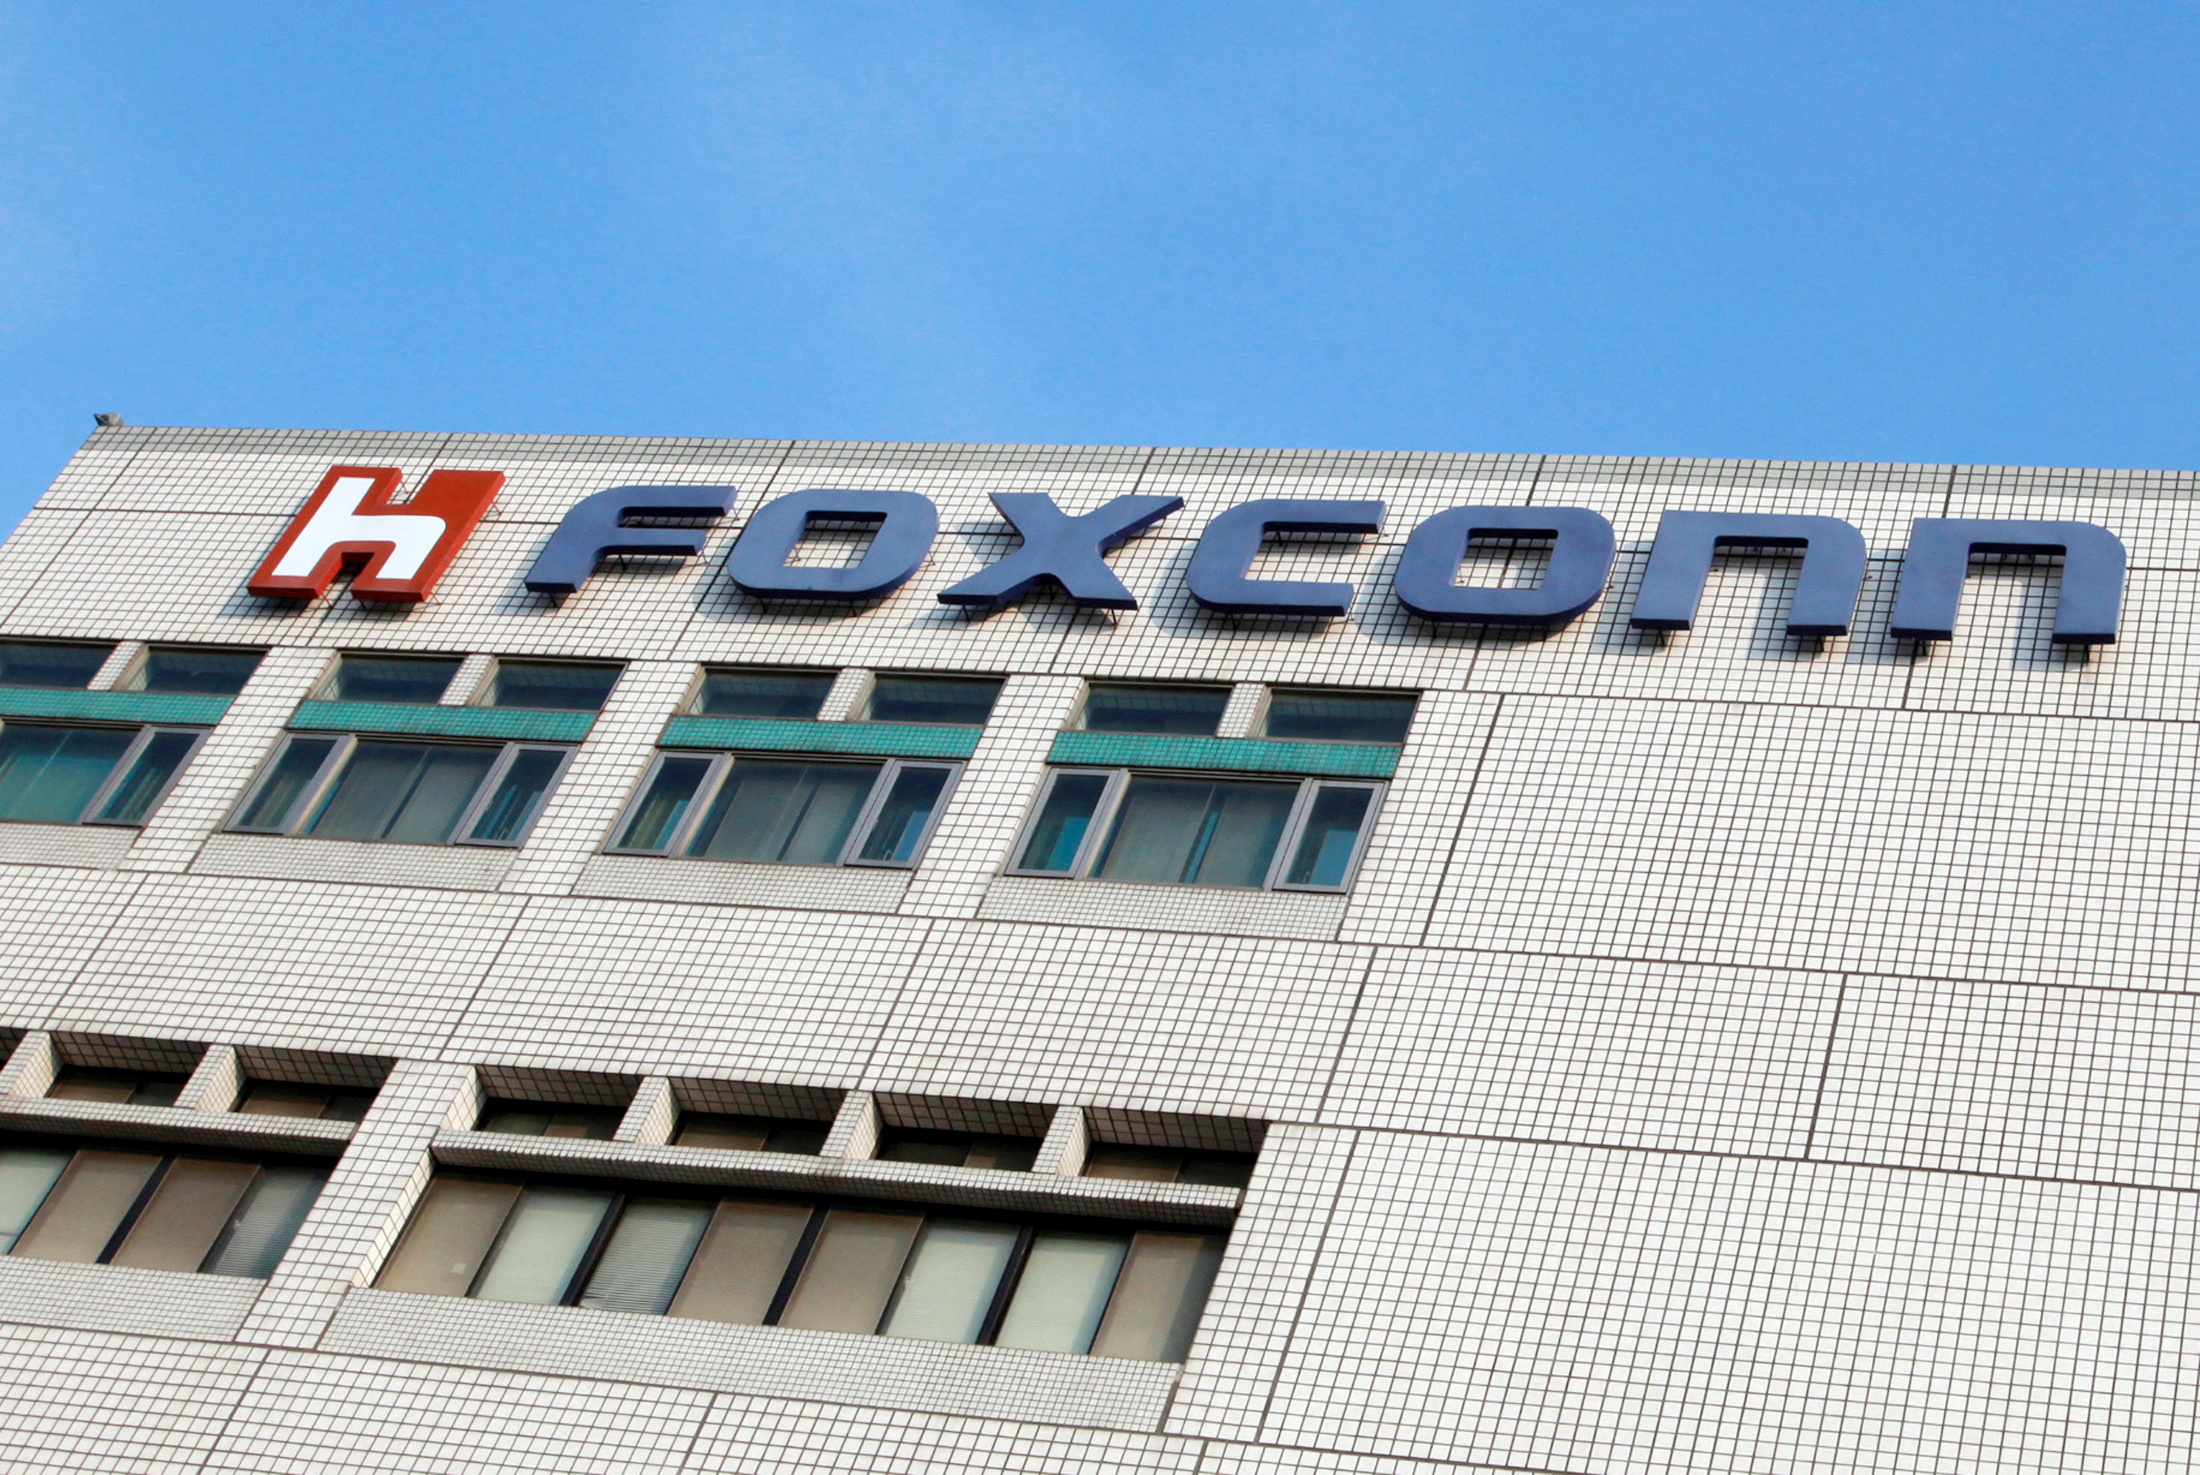 The Foxconn logo is seen on the headquarters building in Tucheng, Taipei County